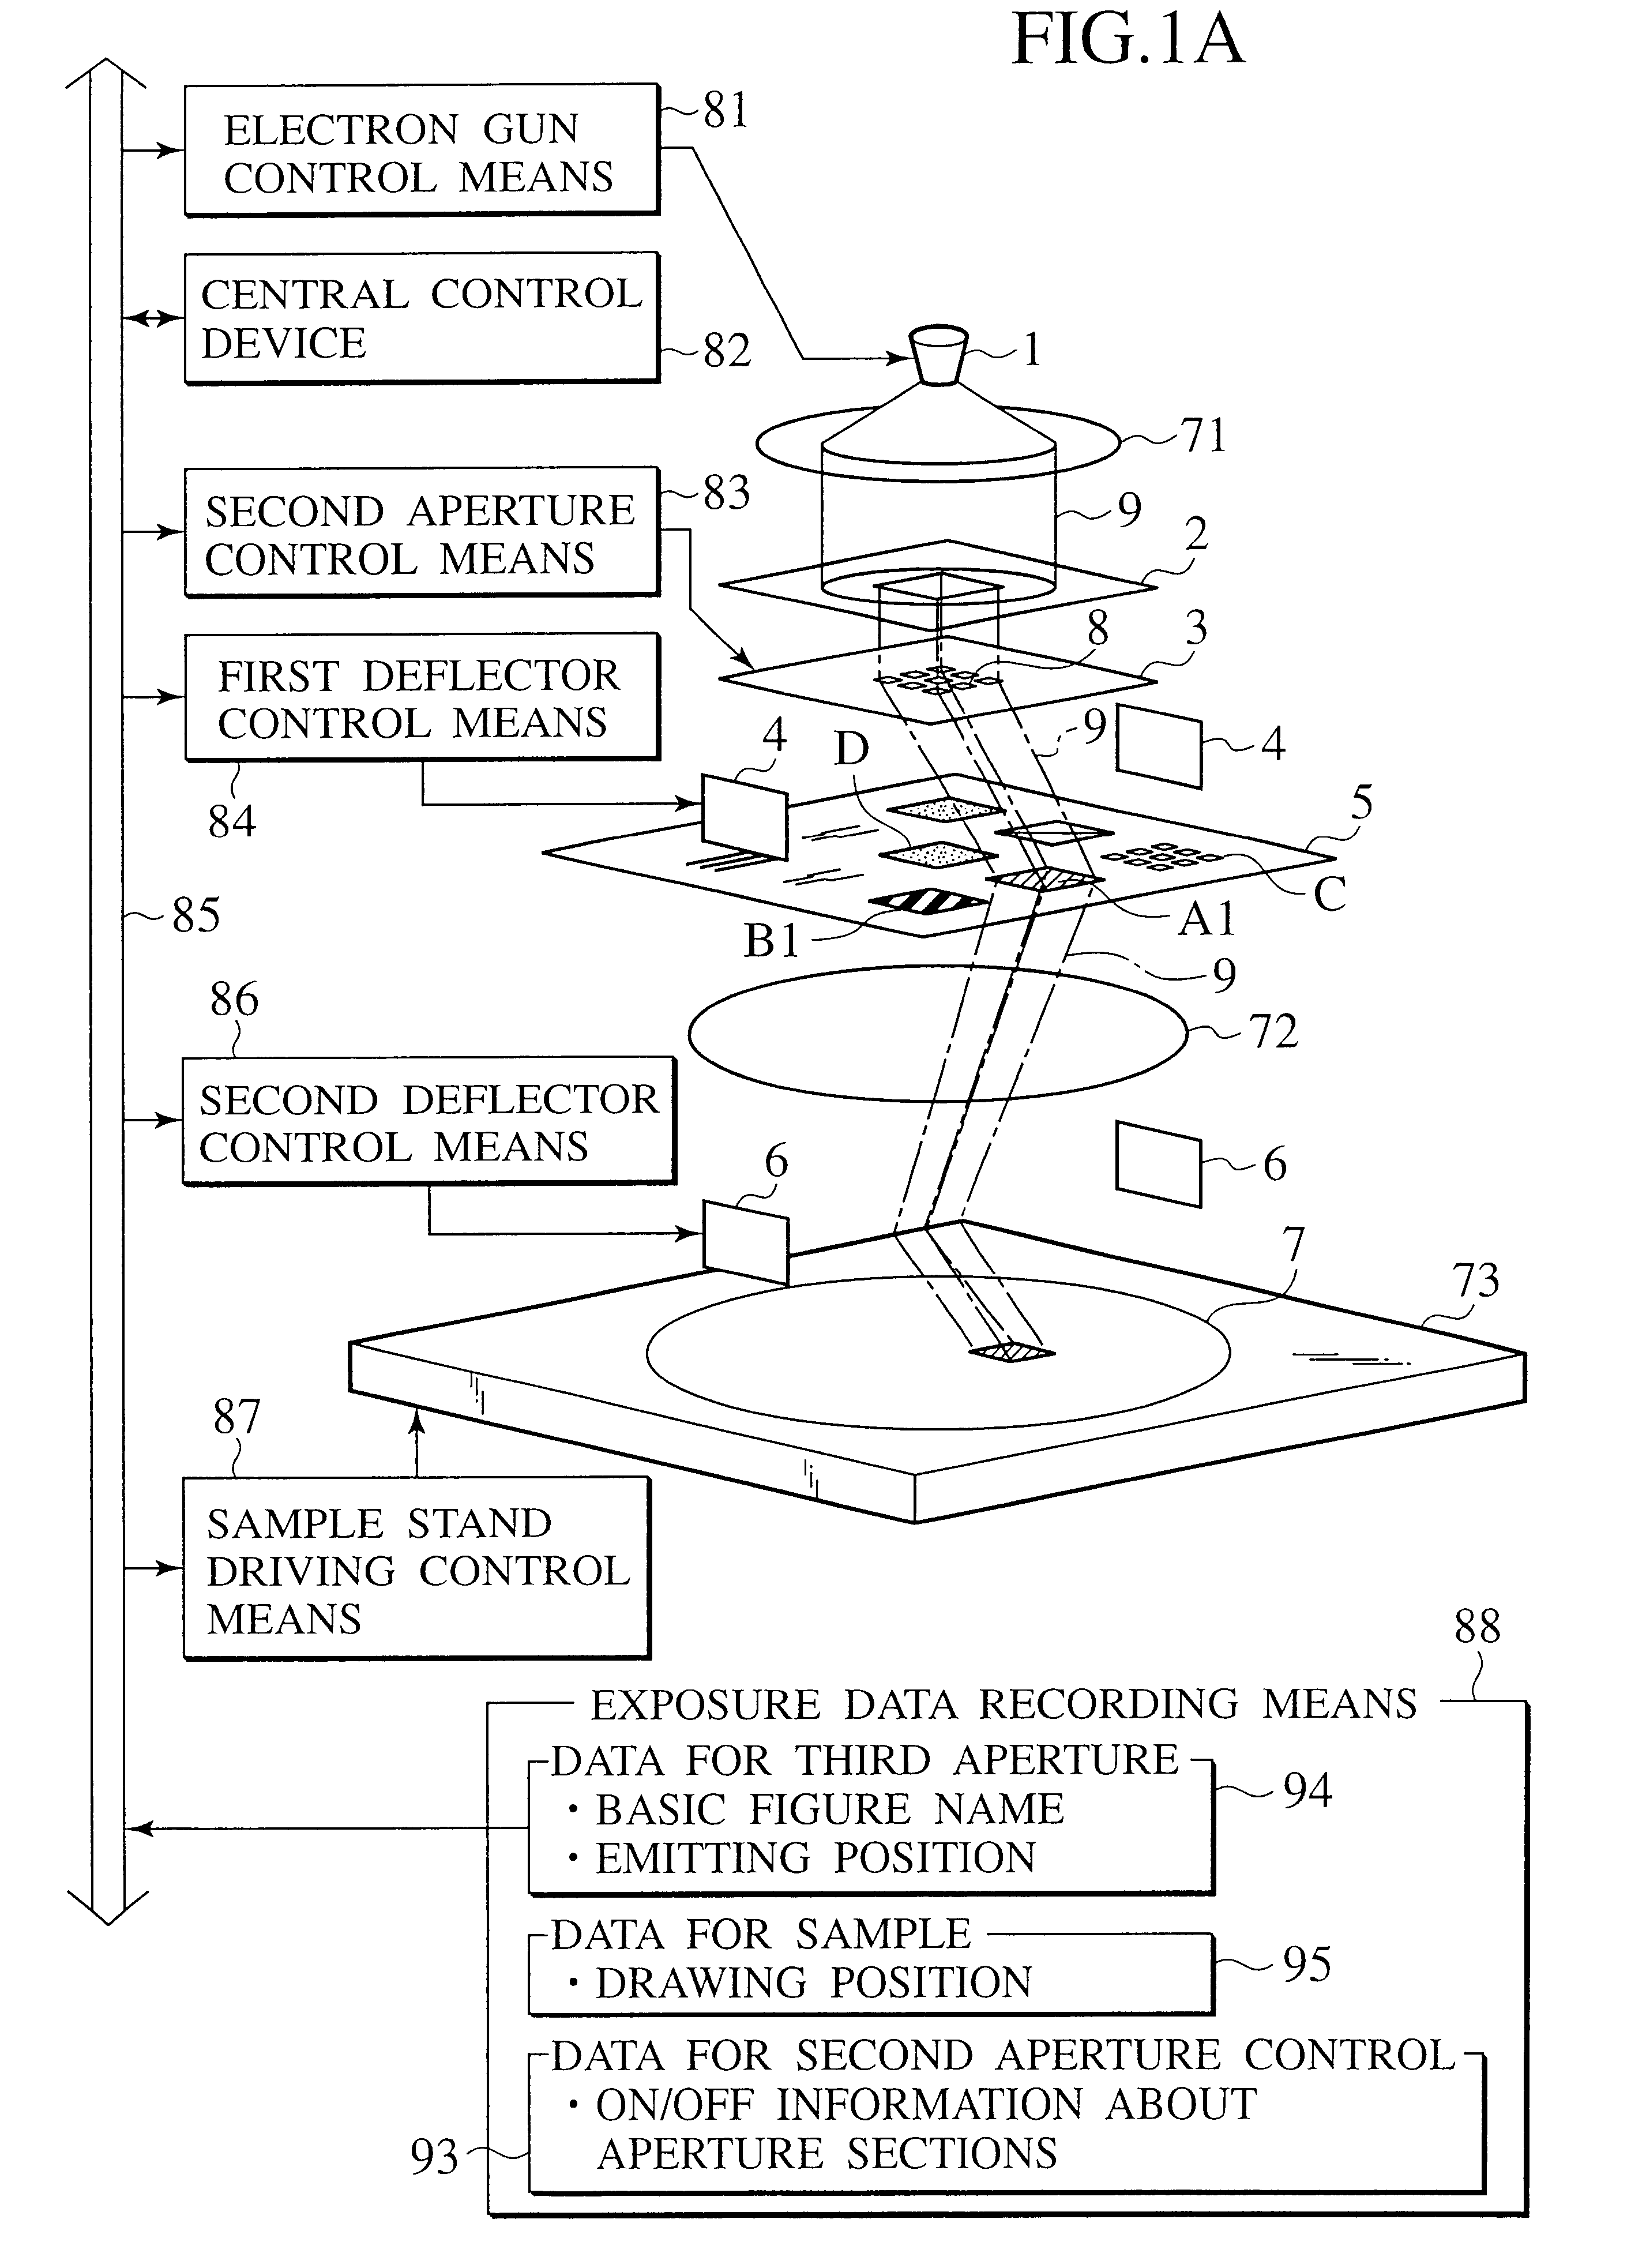 Charged beam exposure apparatus having blanking aperture and basic figure aperture